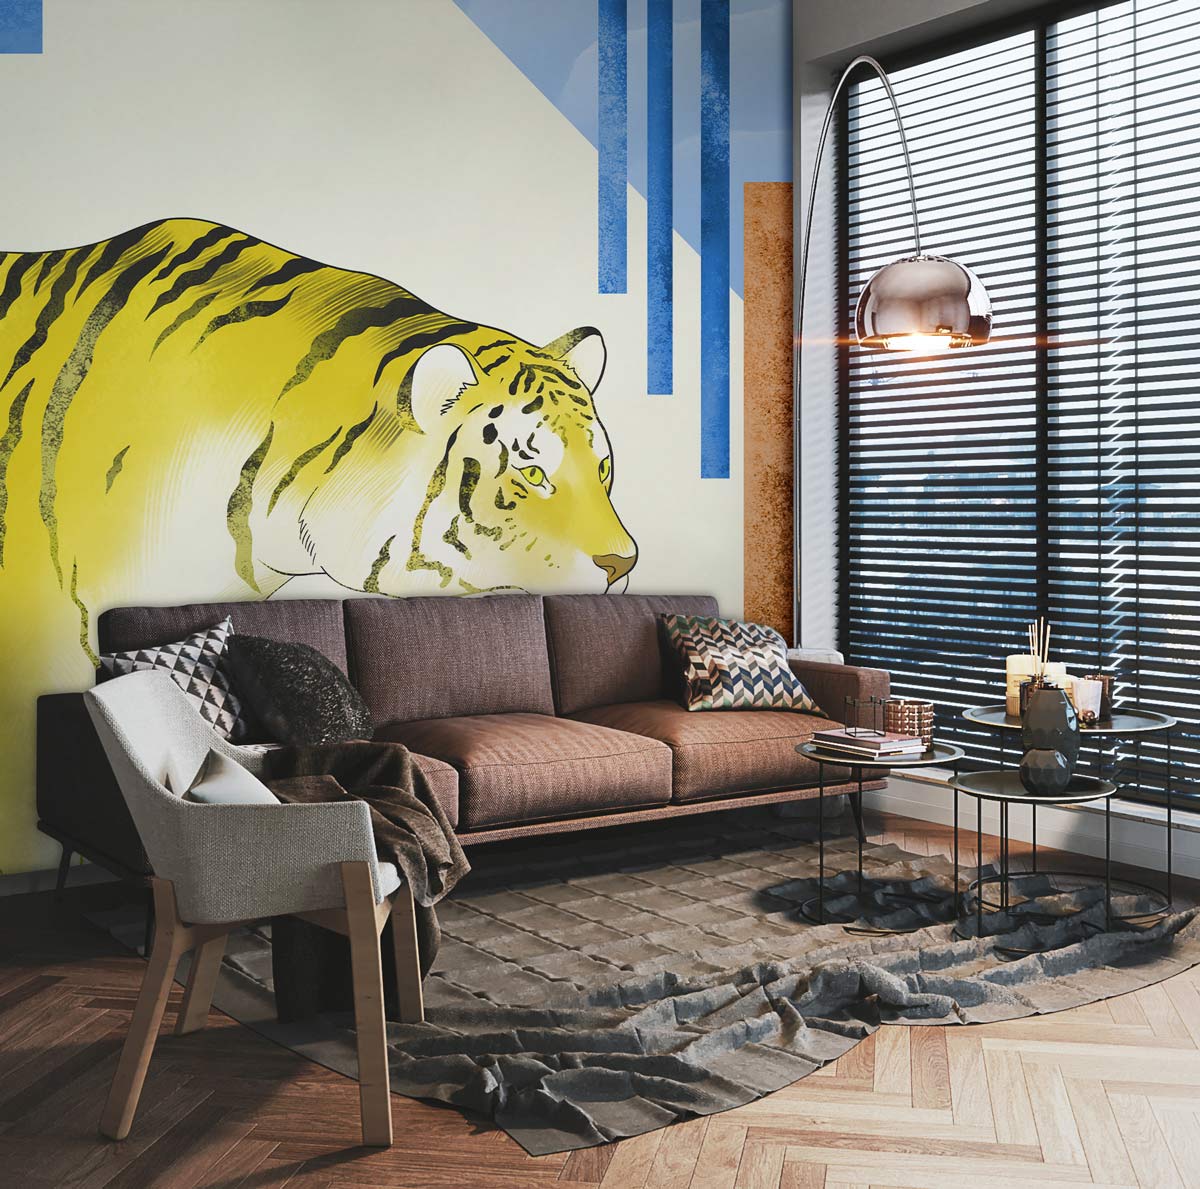 Tiger Animal Wallpaper Mural Living for Use as Decorating Material in the Living Room